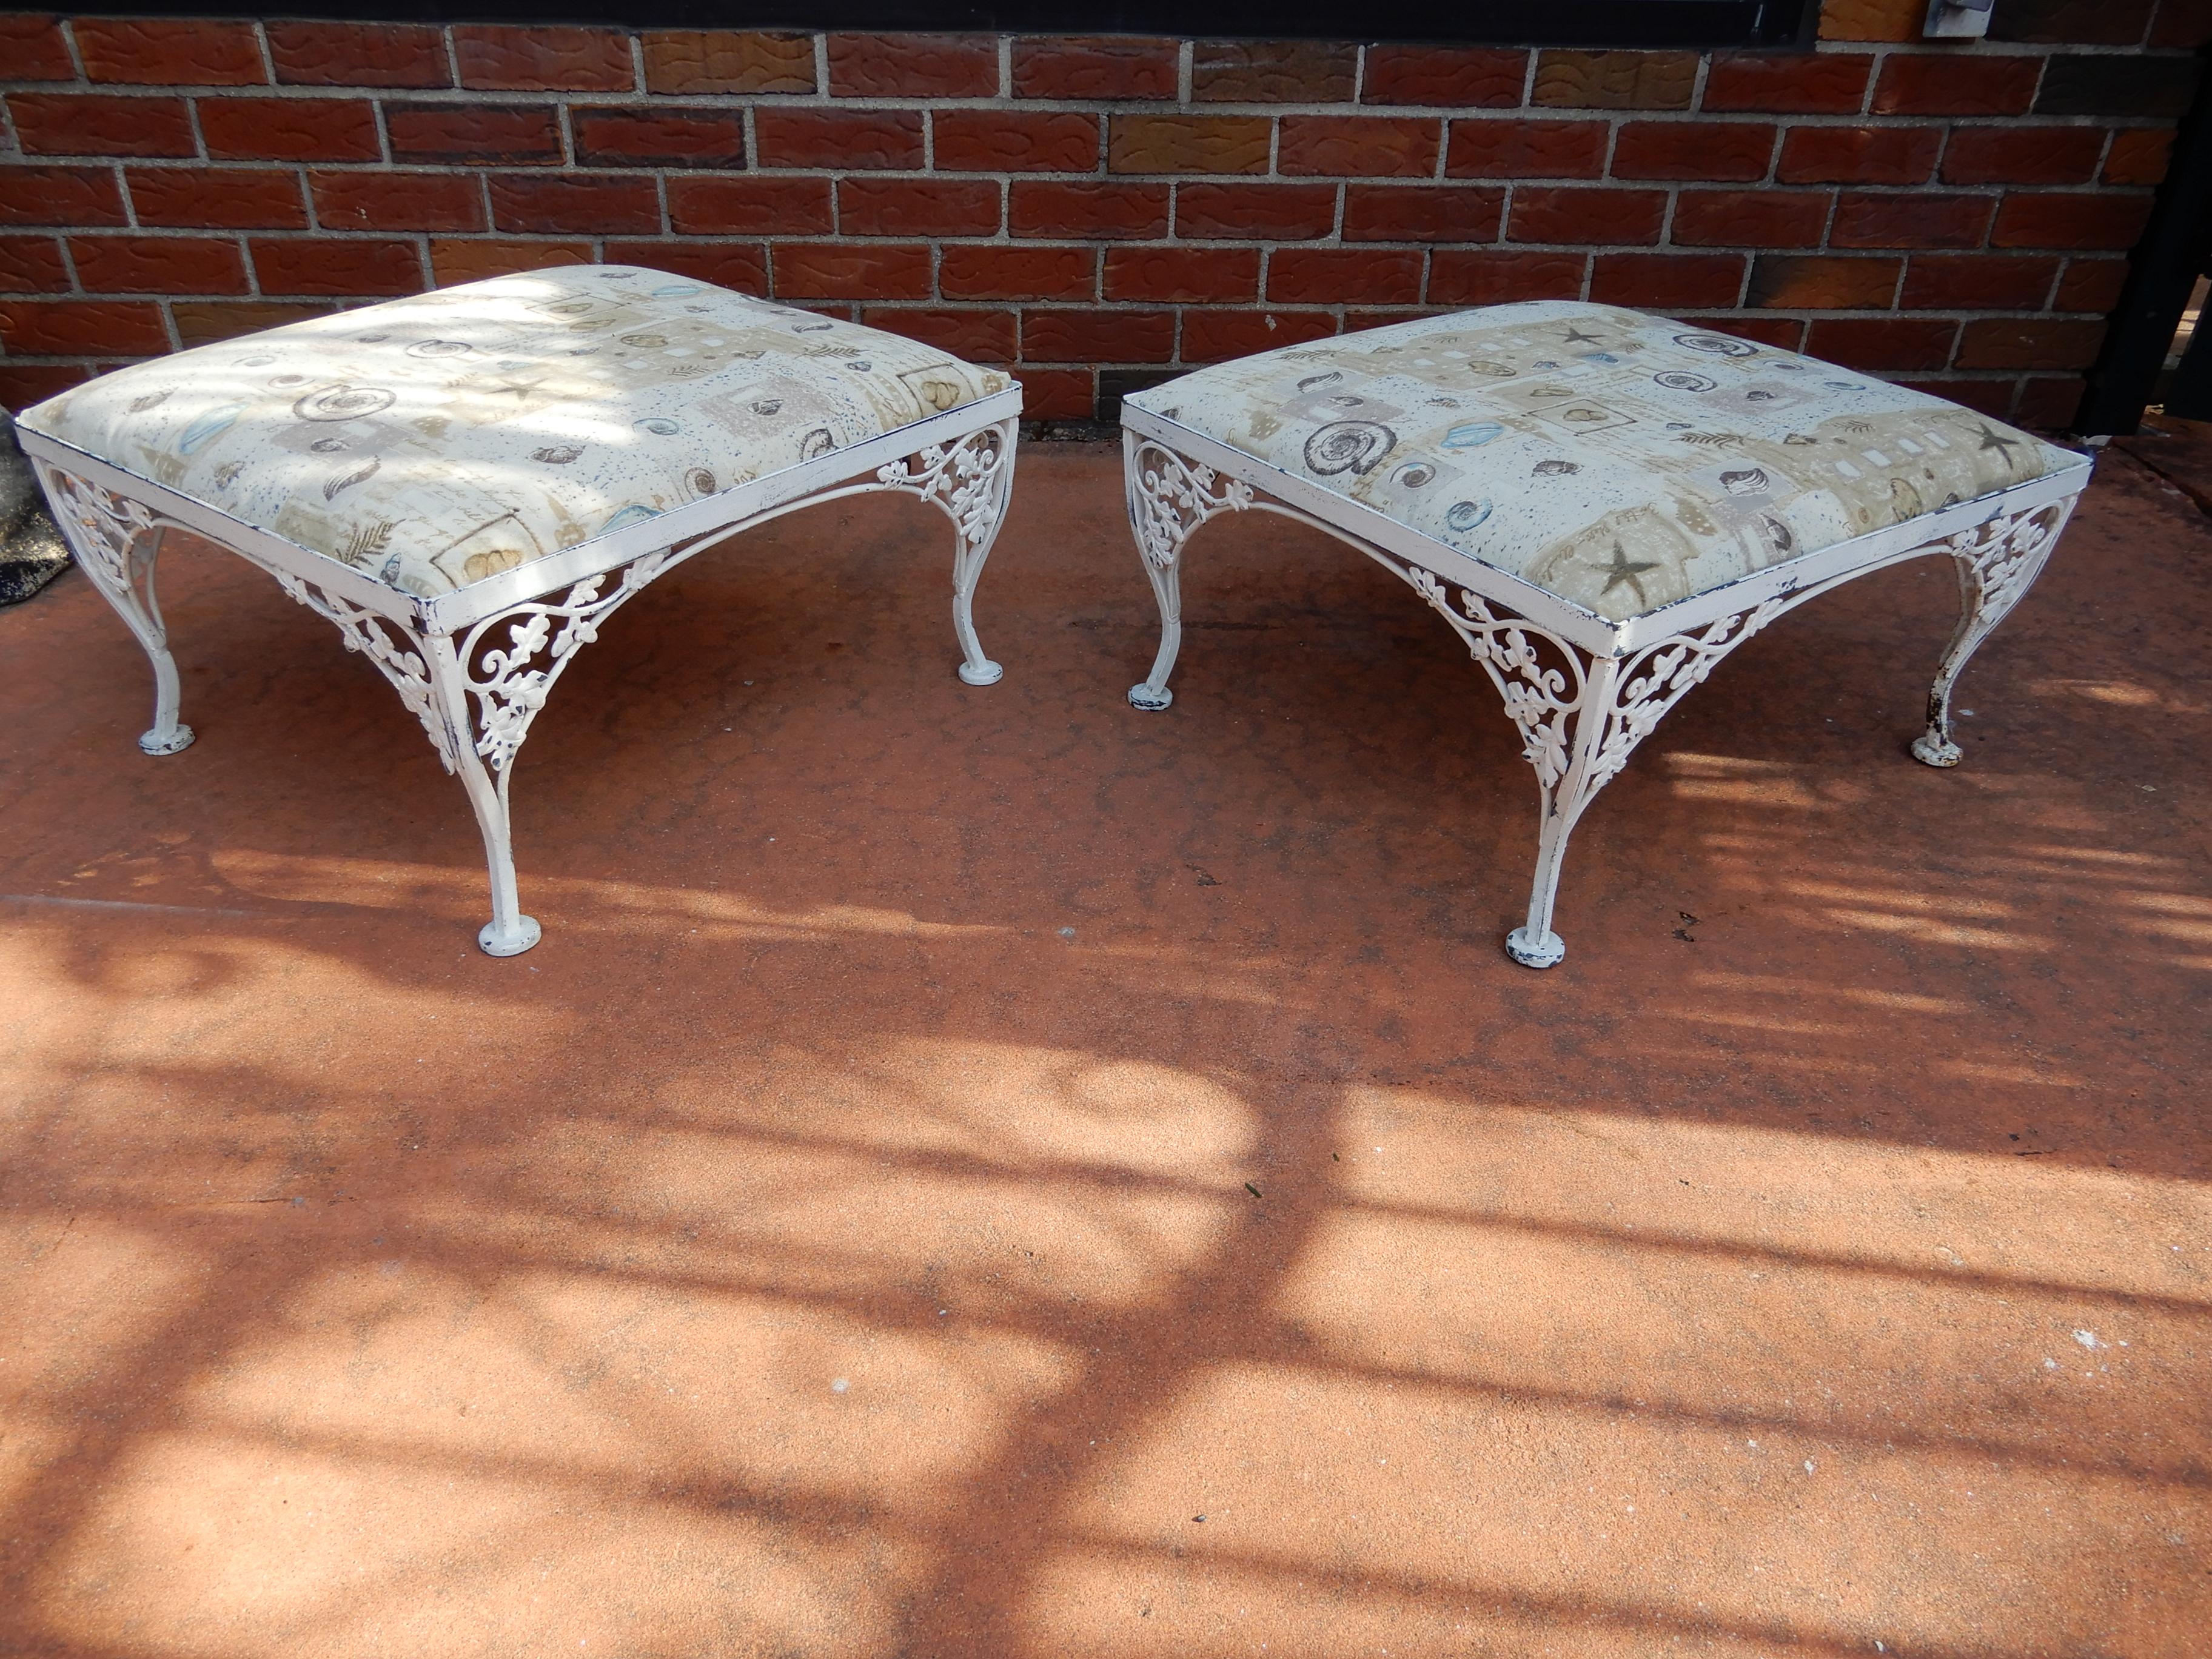 A pair of wrought iron footstools by Woodard Mfg co. In the Orleans pattern, showing details of acorns and leaves
The white painted finish is worn and is as found. Pairs of footstools are rarely found in wrought iron.